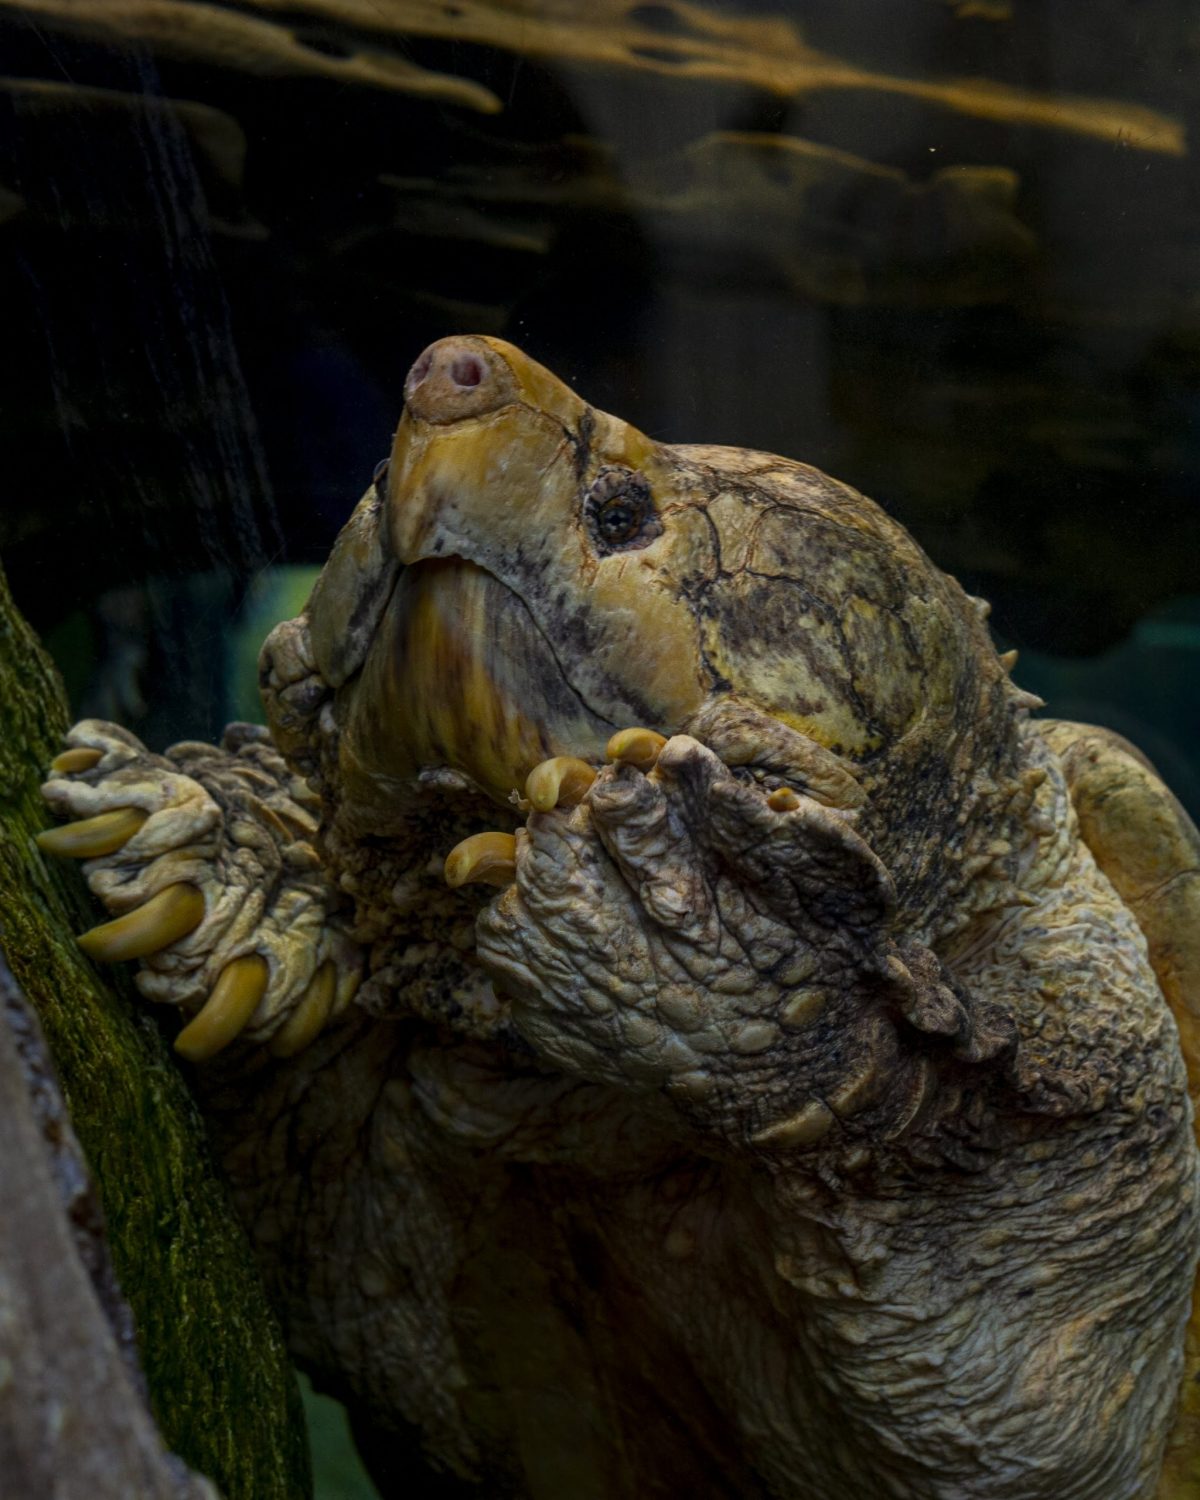 A male Alligator Snapping Turtle